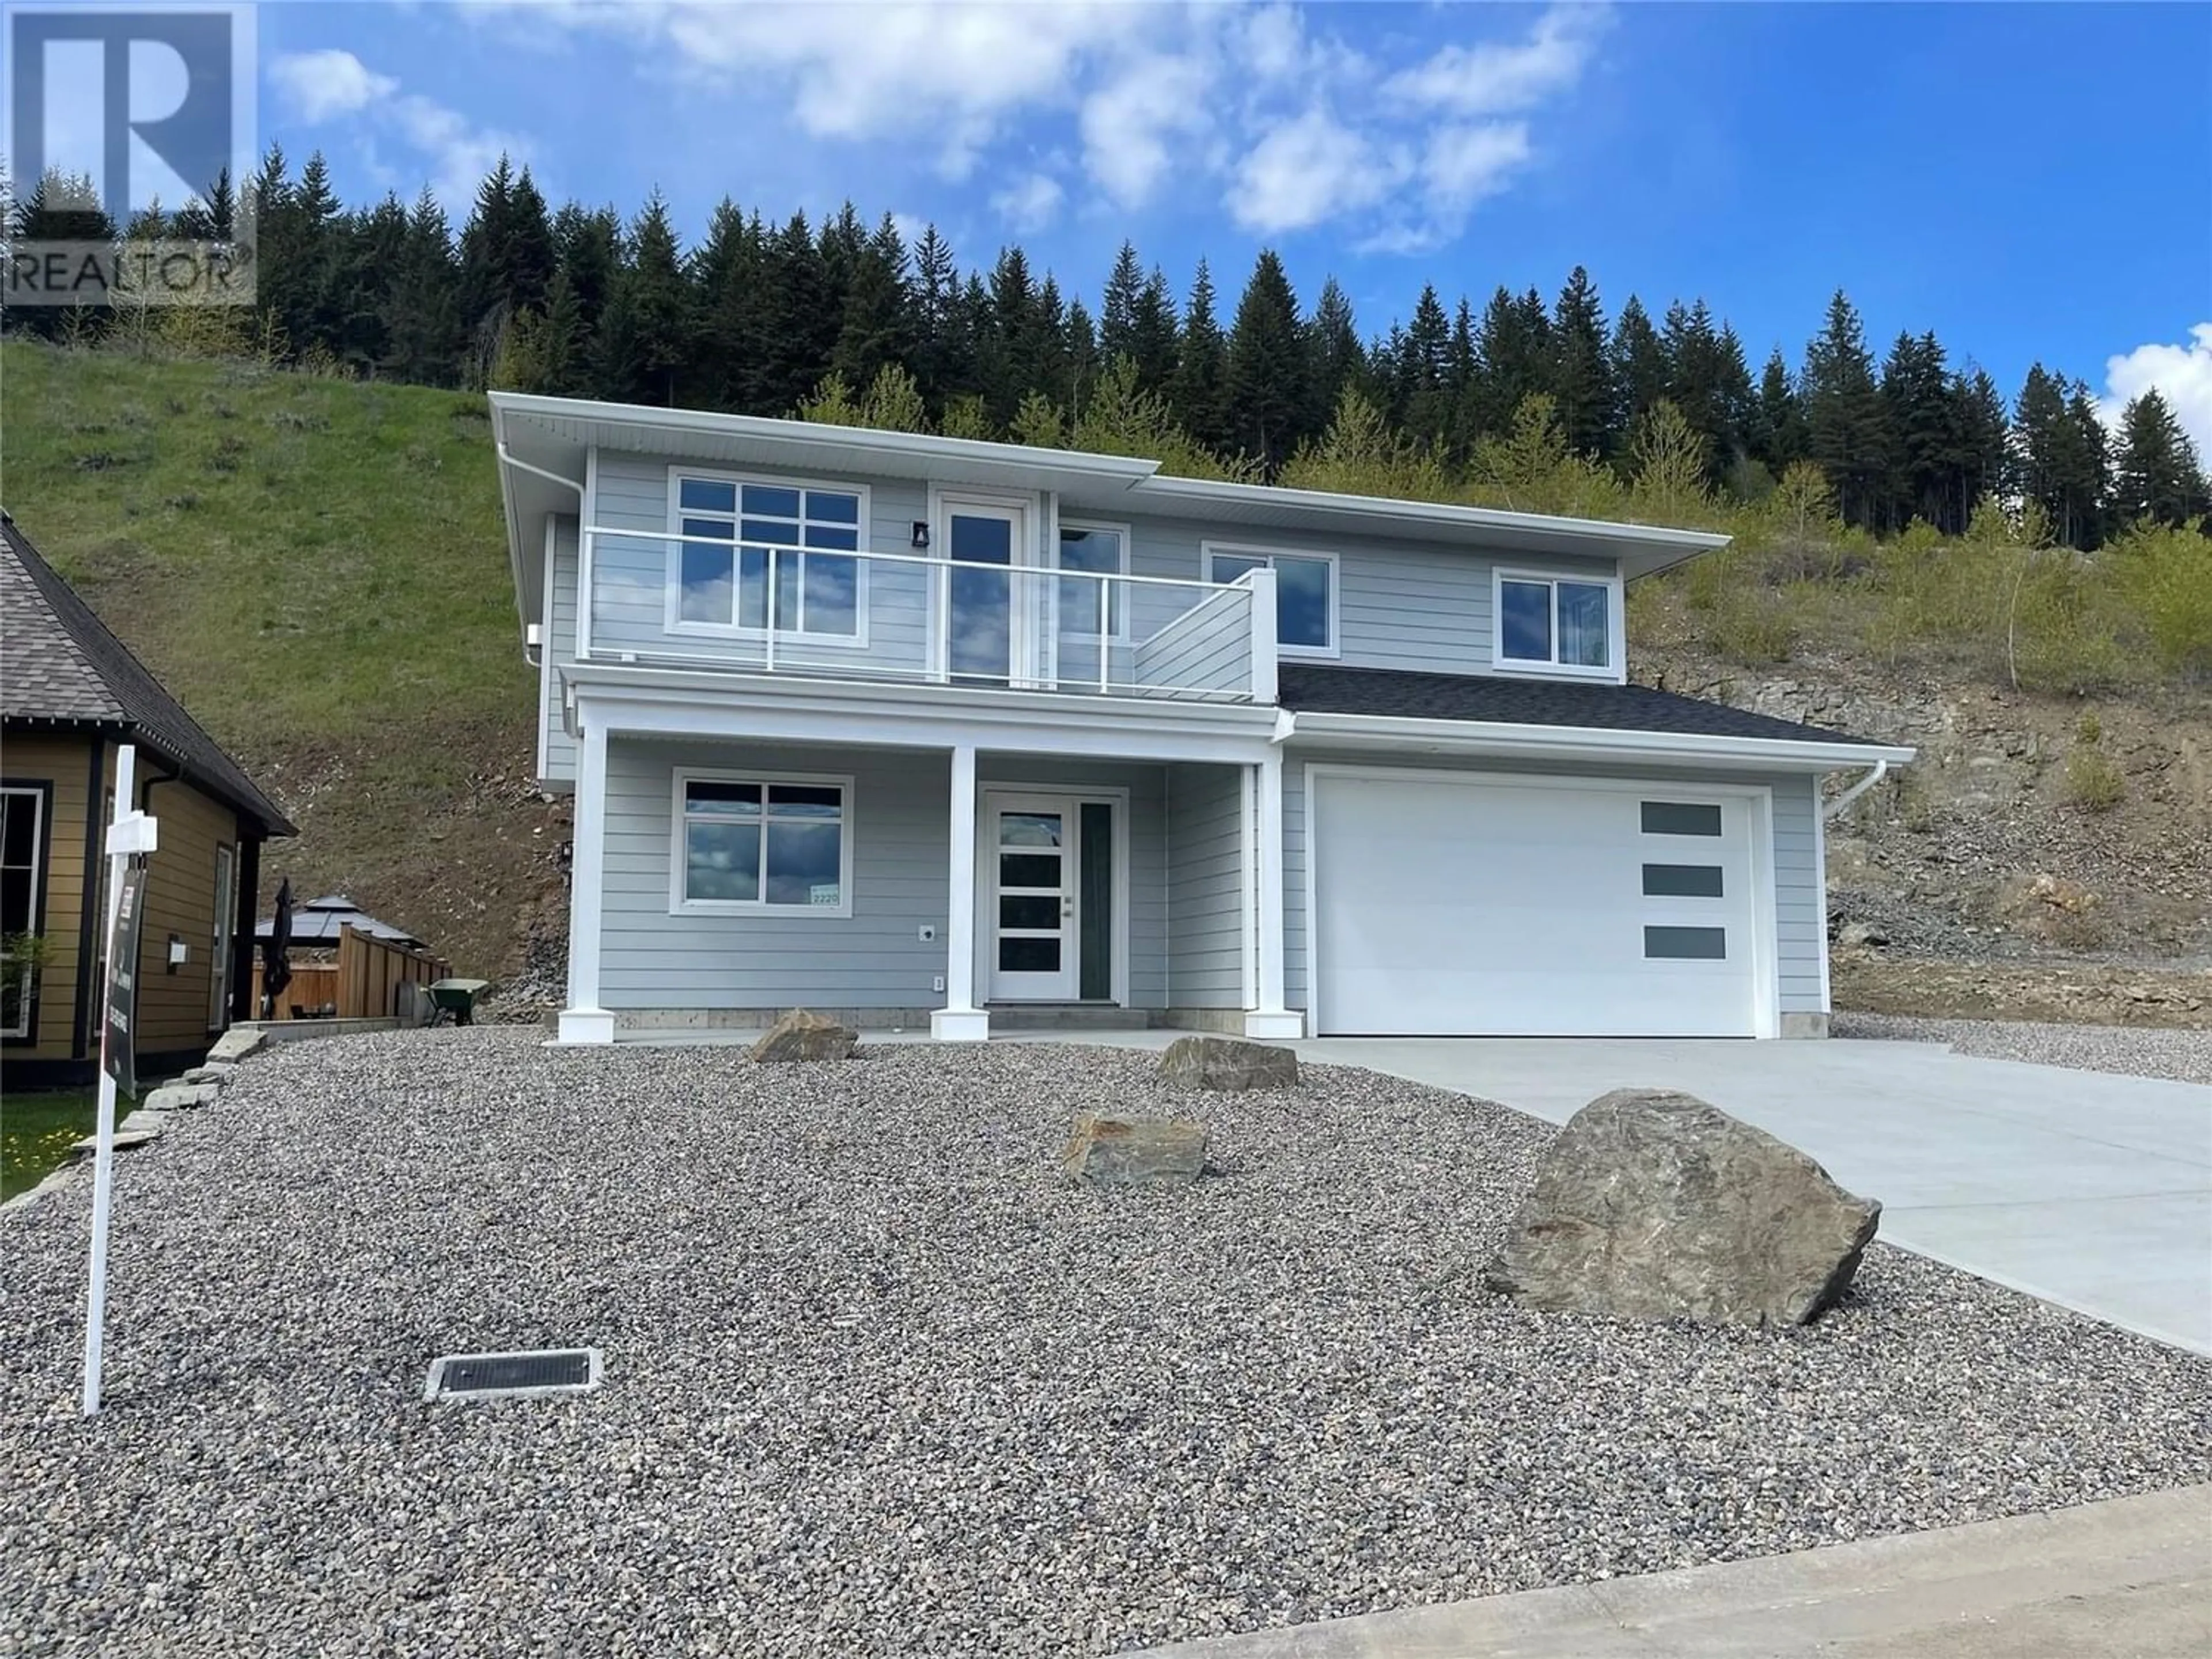 Home with vinyl exterior material for 2220 Mountain View Avenue, Lumby British Columbia V0E2G0